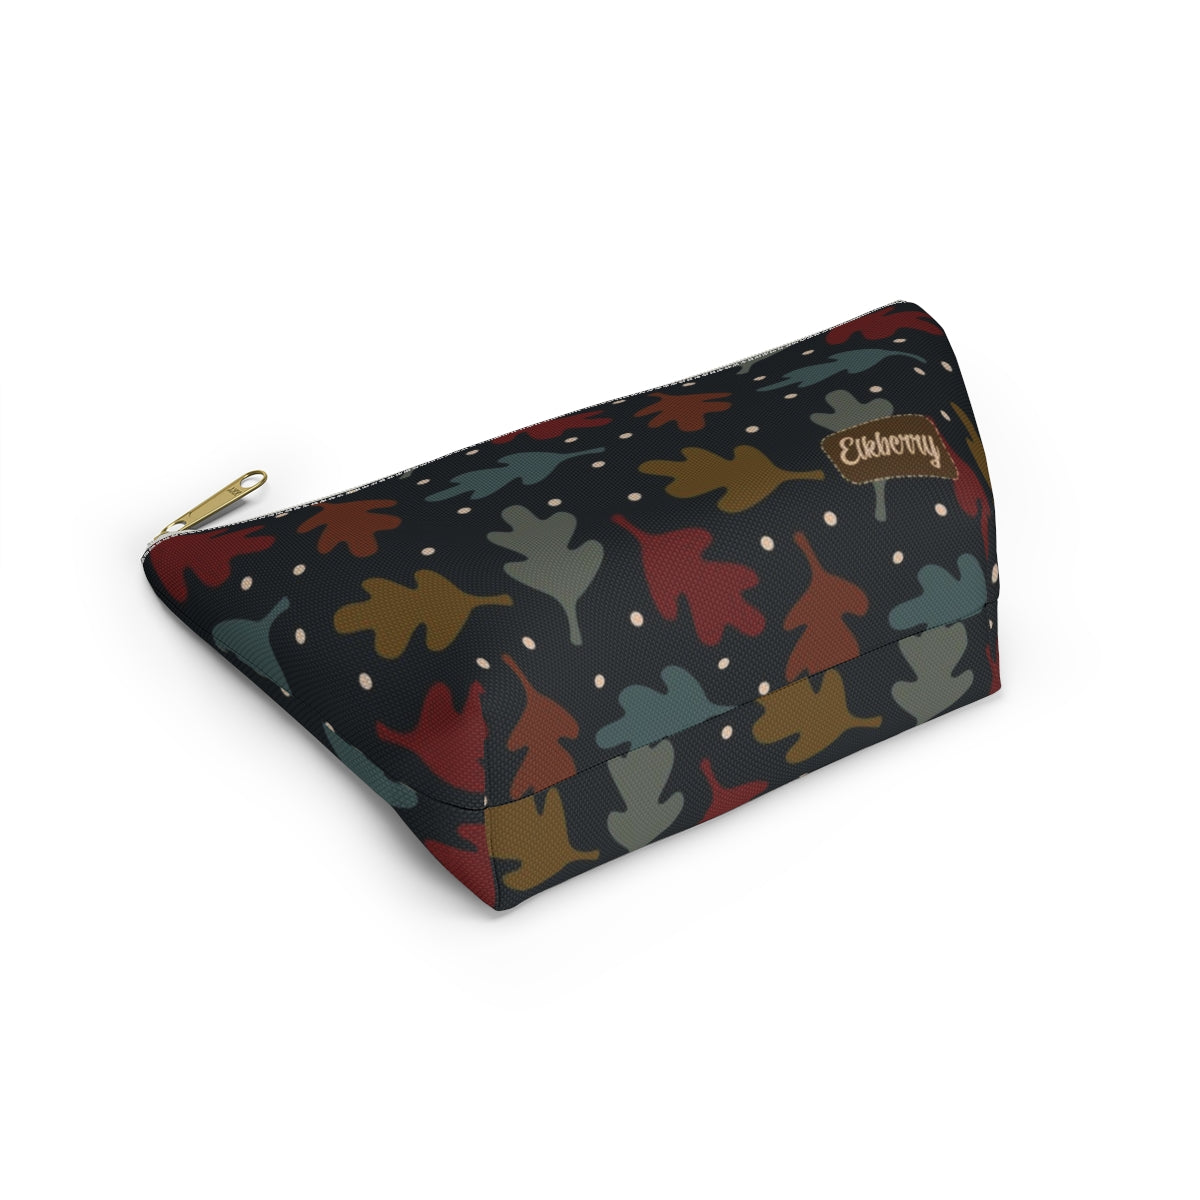 Big Bottom Zipper Pouch - Fall Leaves on Navy